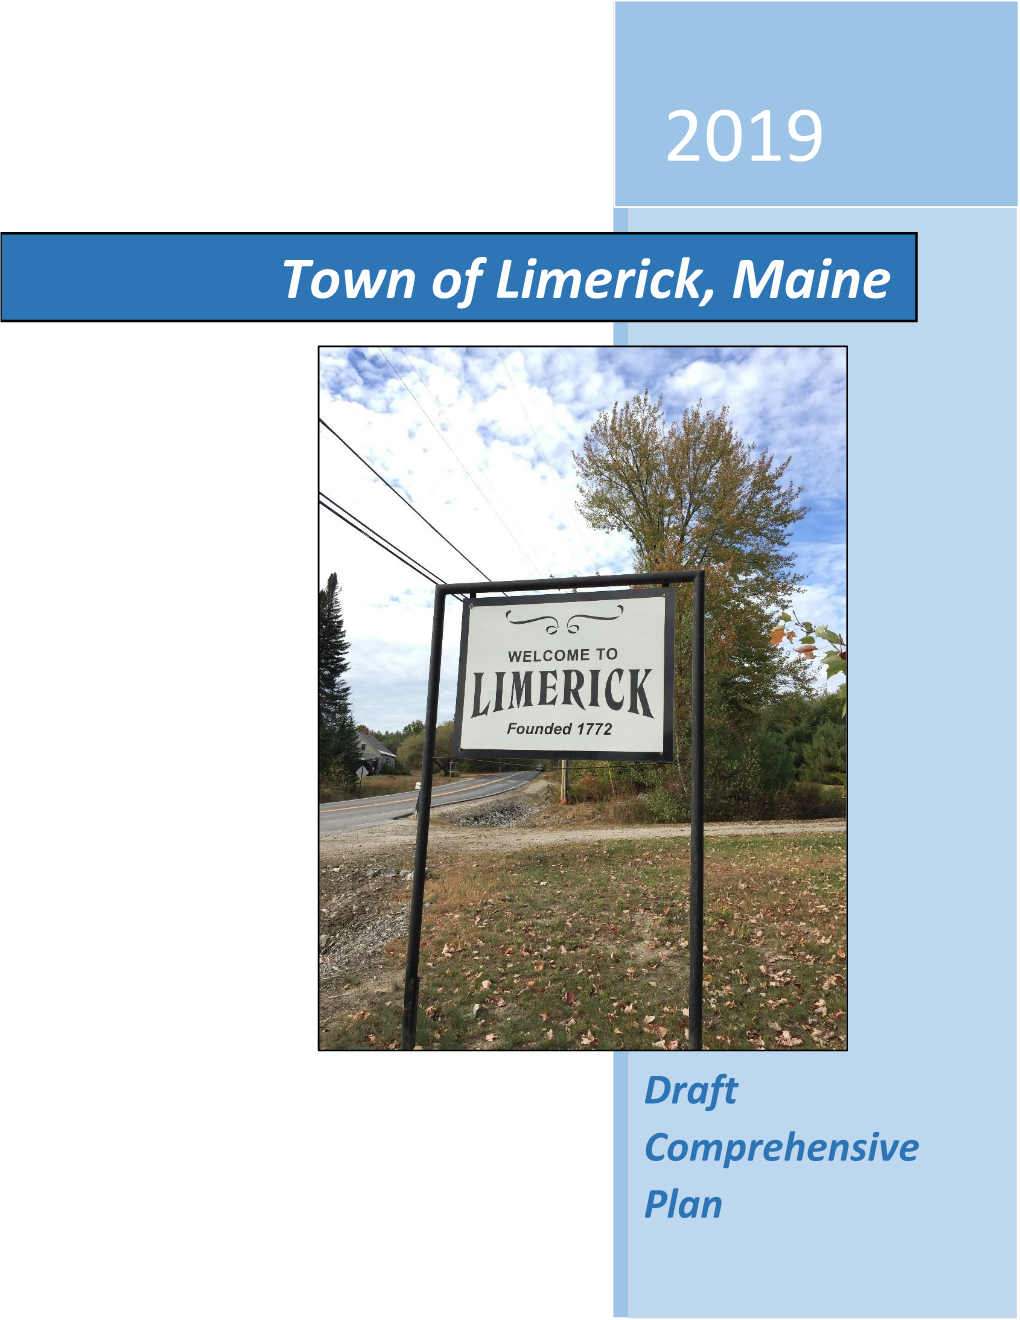 Town of Limerick, Maine